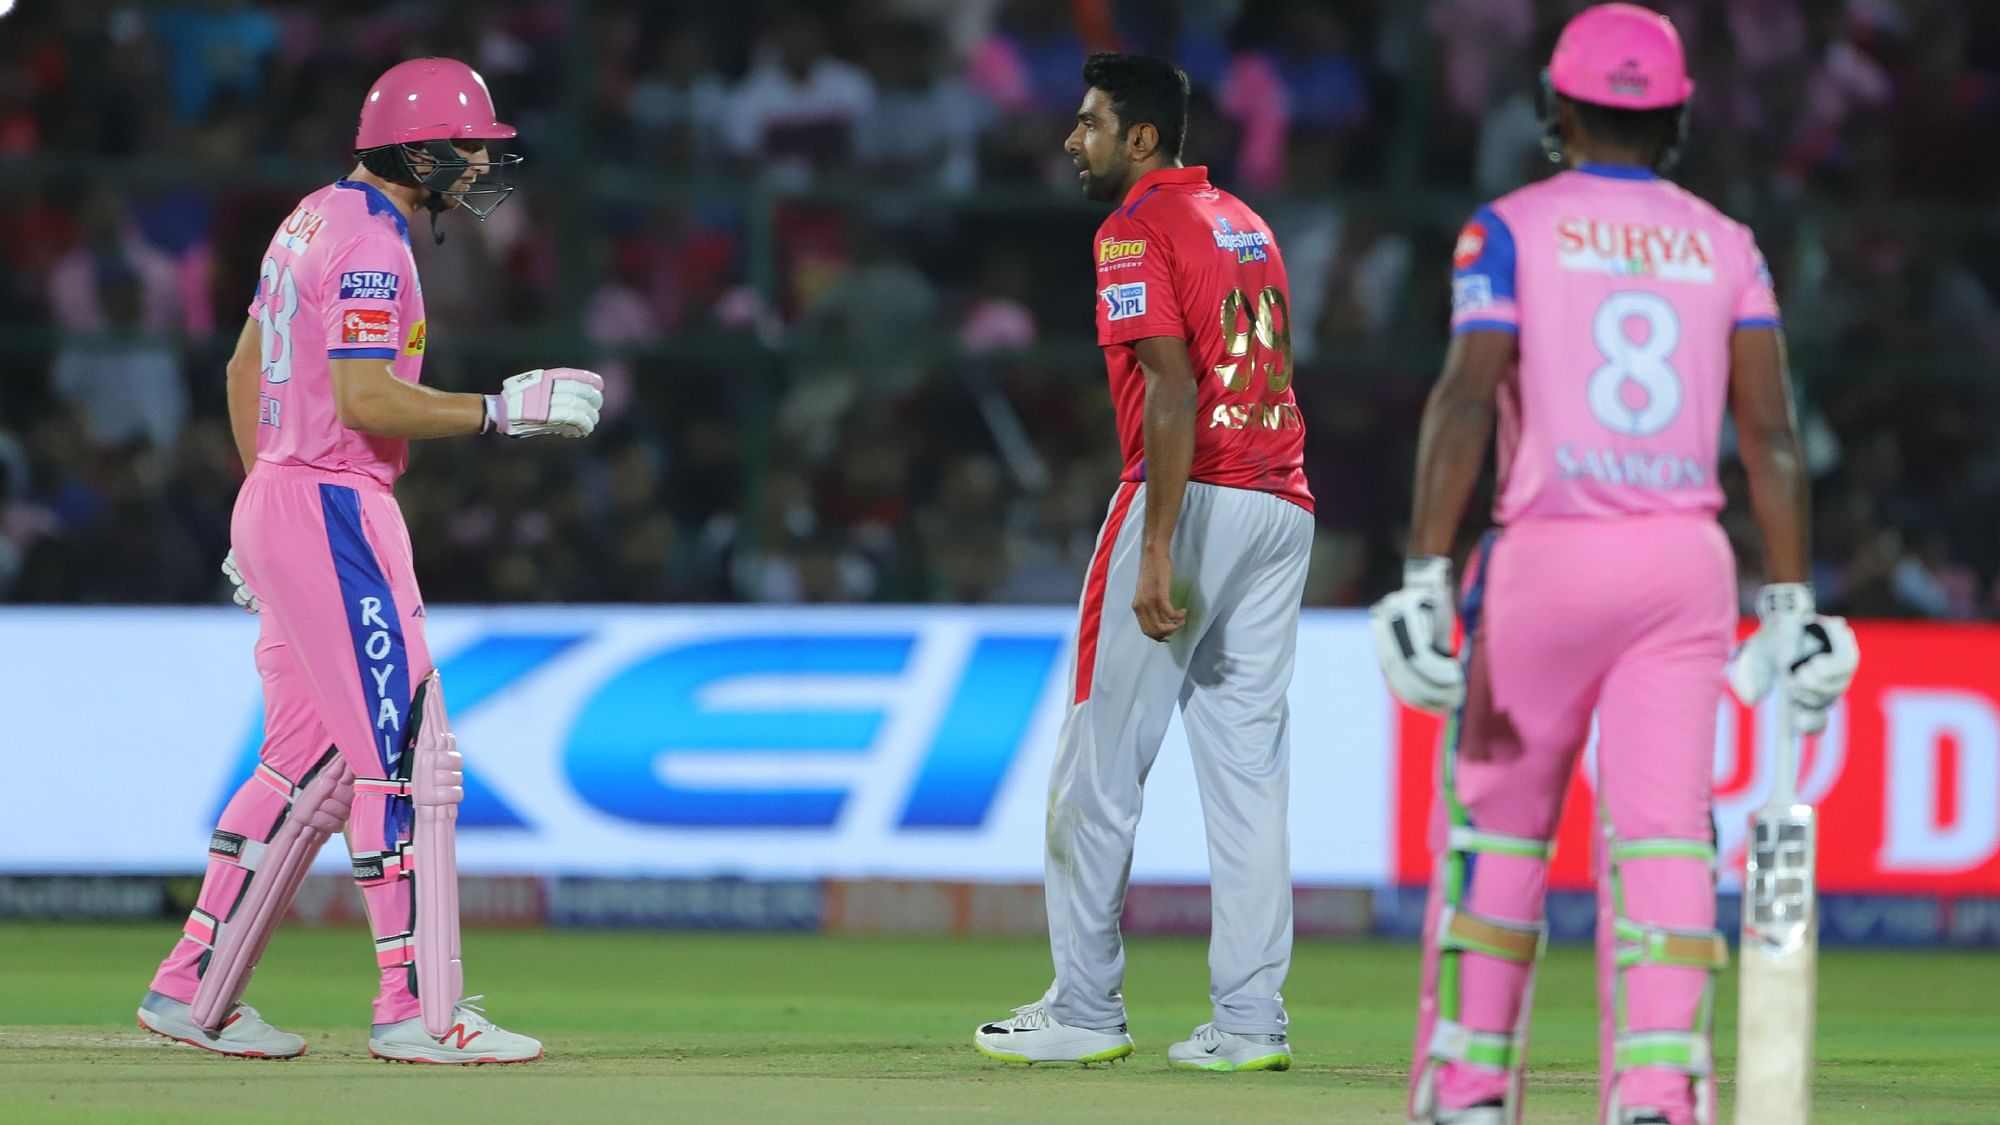 Ravichandran Ashwin and Jos Buttler have a word during Match 4 of the Indian Premier League.